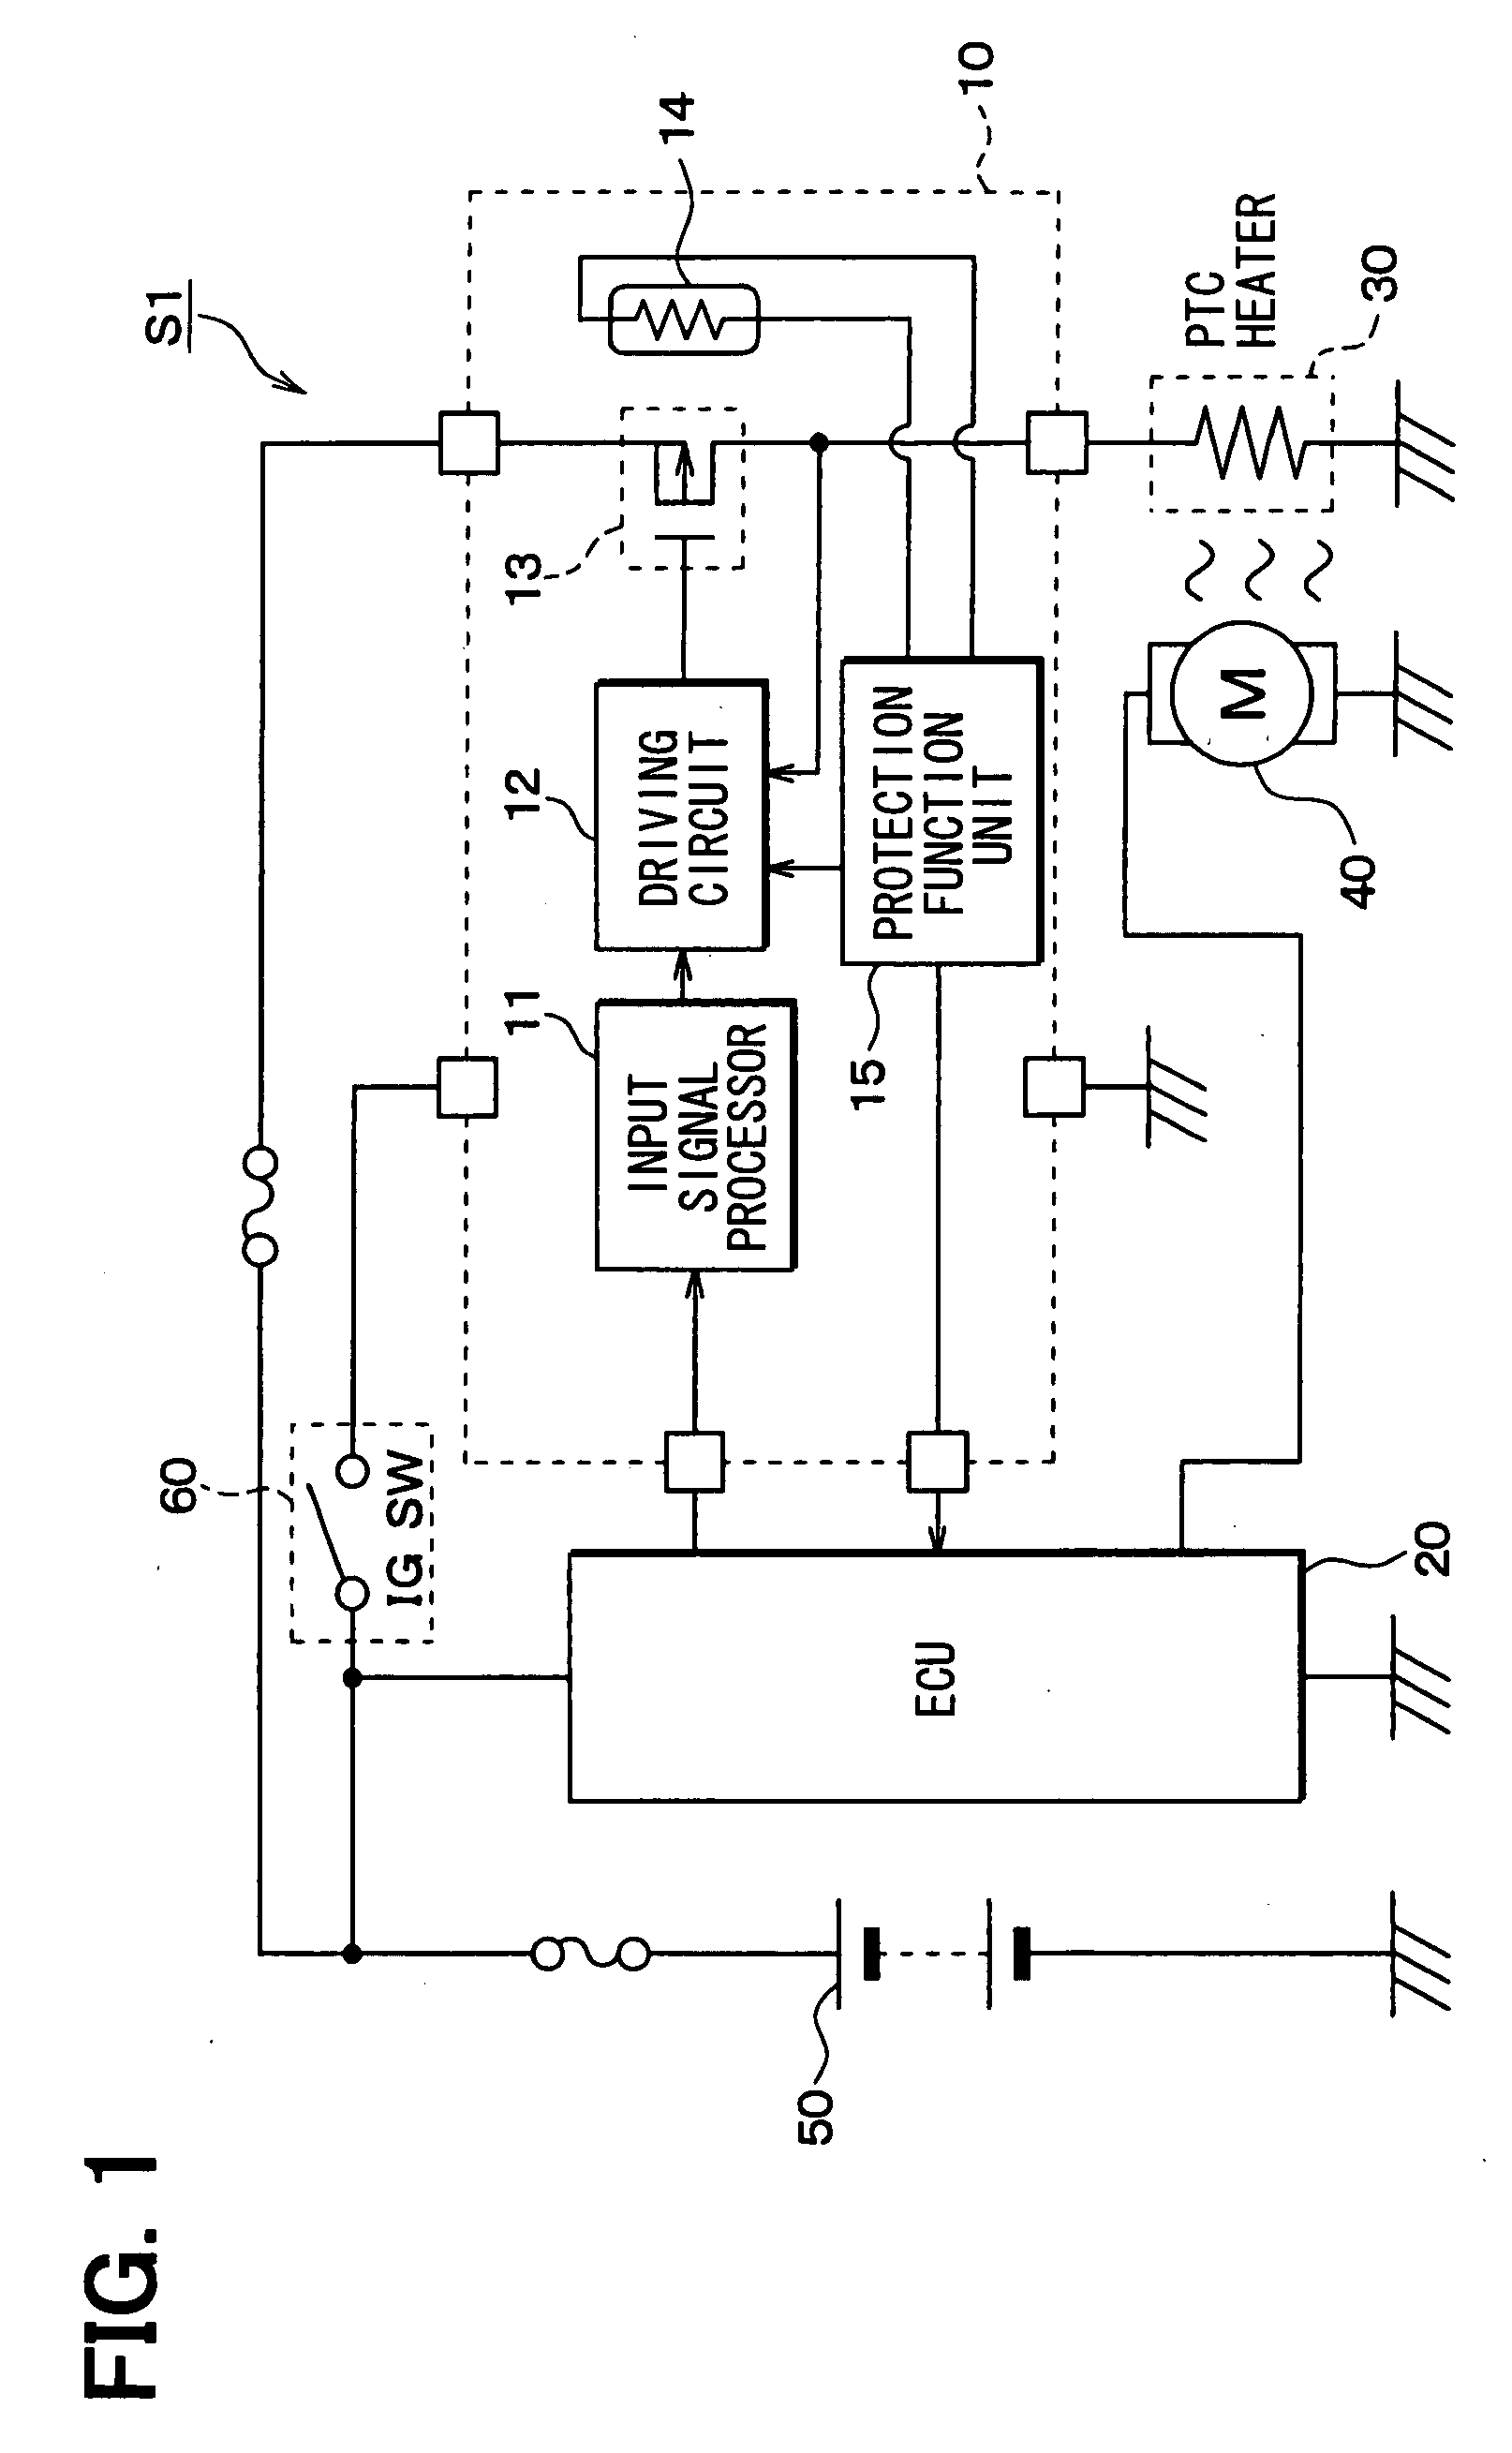 Load drive controller and control system